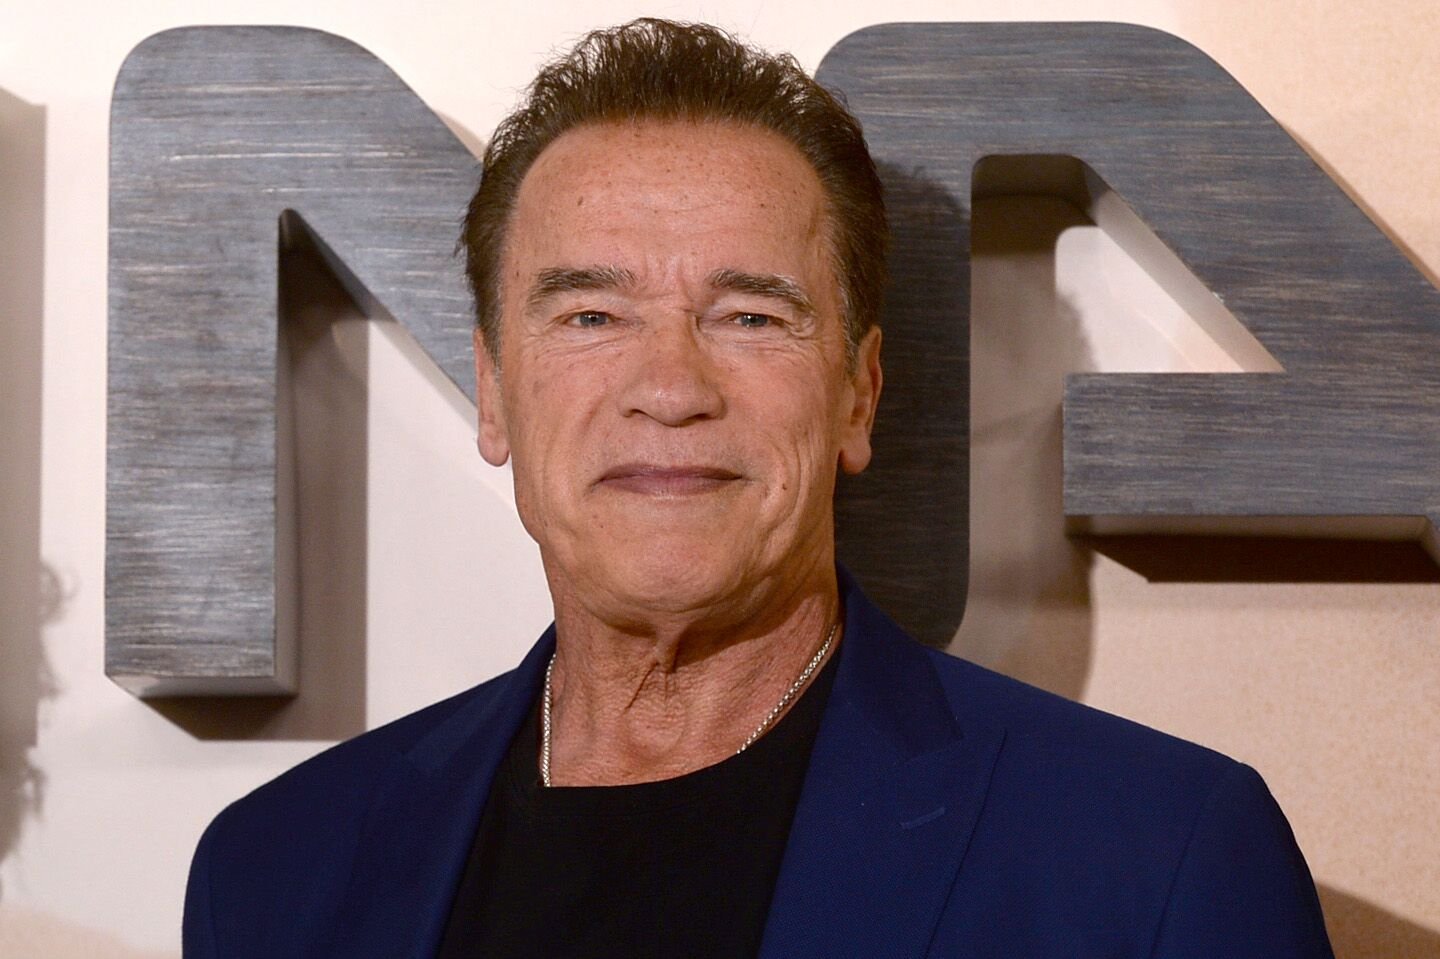 Arnold Schwarzenegger attends the "Terminator: Dark Fate" photocall on October 17, 2019 | Photo: Getty Images